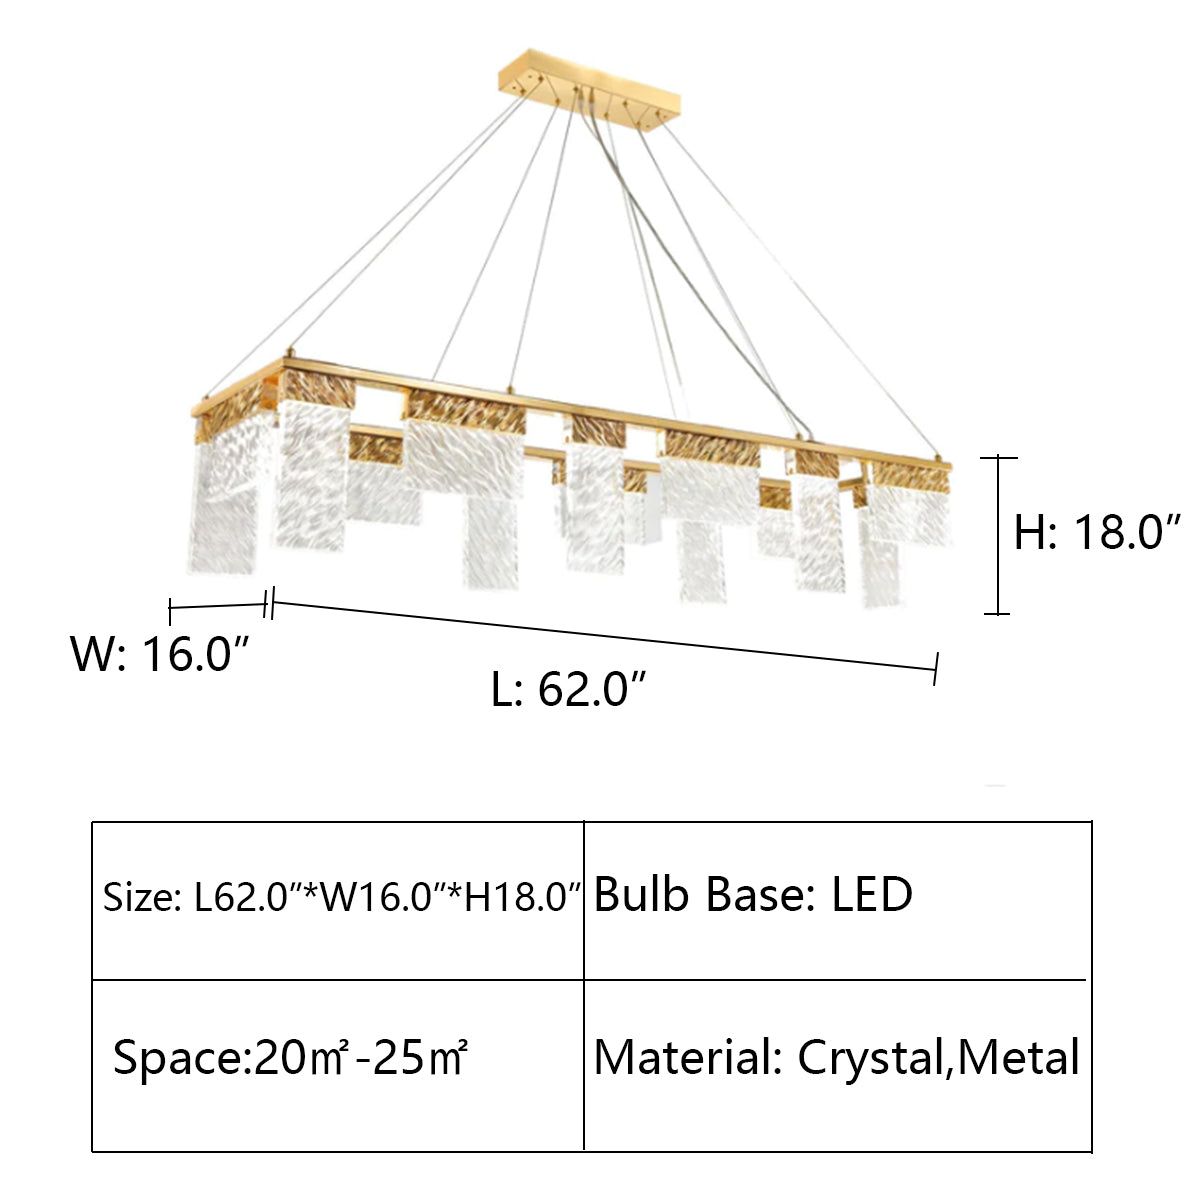 L62.0"*W16.0"*H18.0" Aimee LED Rectangle Glass Chandelier,chandelier,chandeliers,pendant,crystal,metal,gold,luxury,light luxury,ceiling,long table,dining table,kitchen island,bar,kitchen bar,dining bar